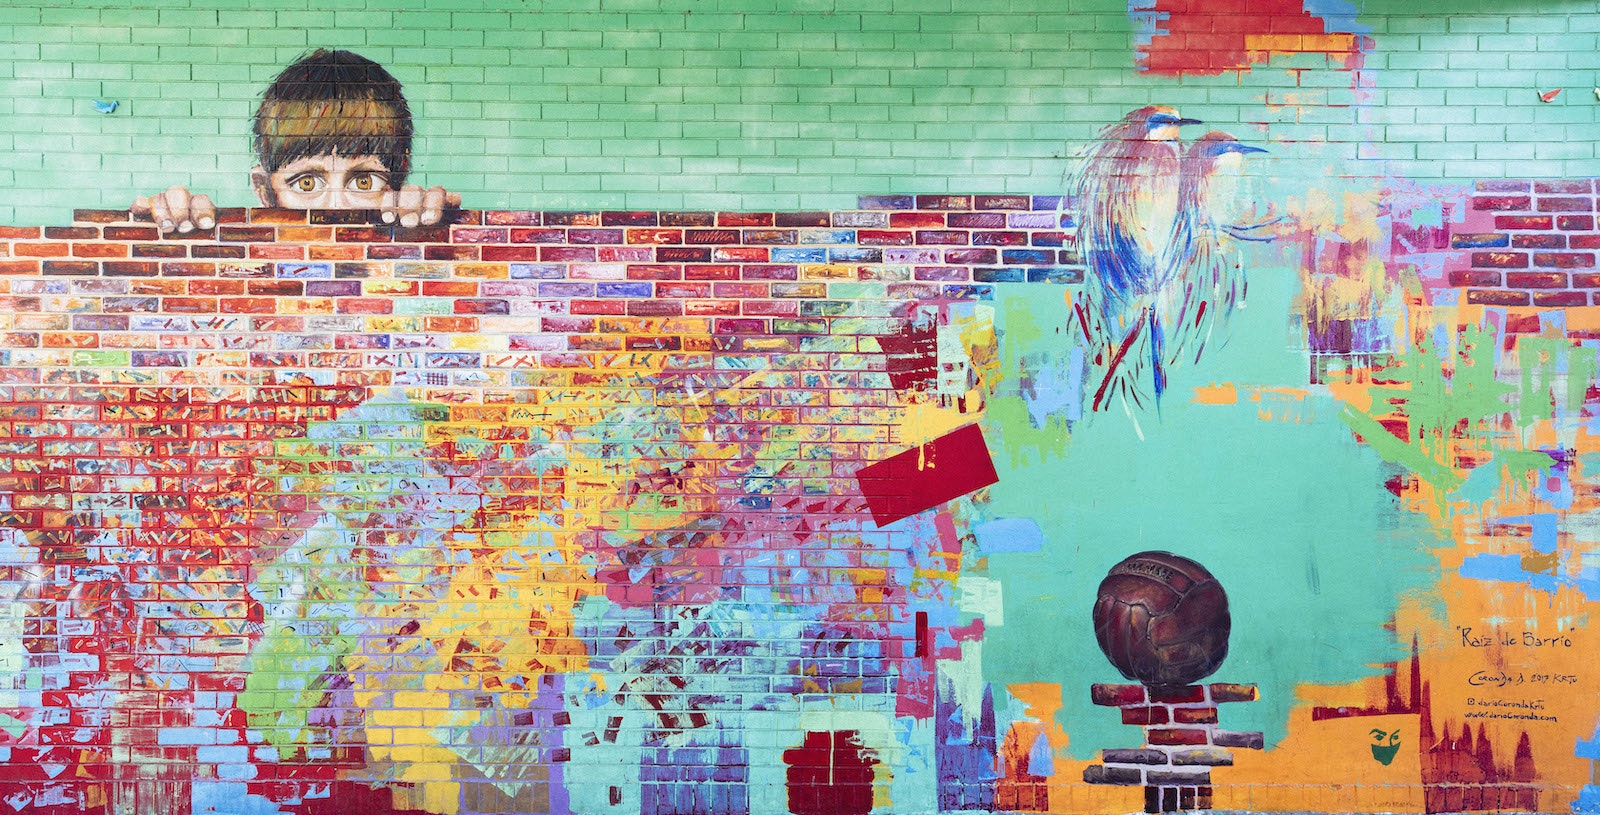 A colorful mural depicting a boy peeking over a wall